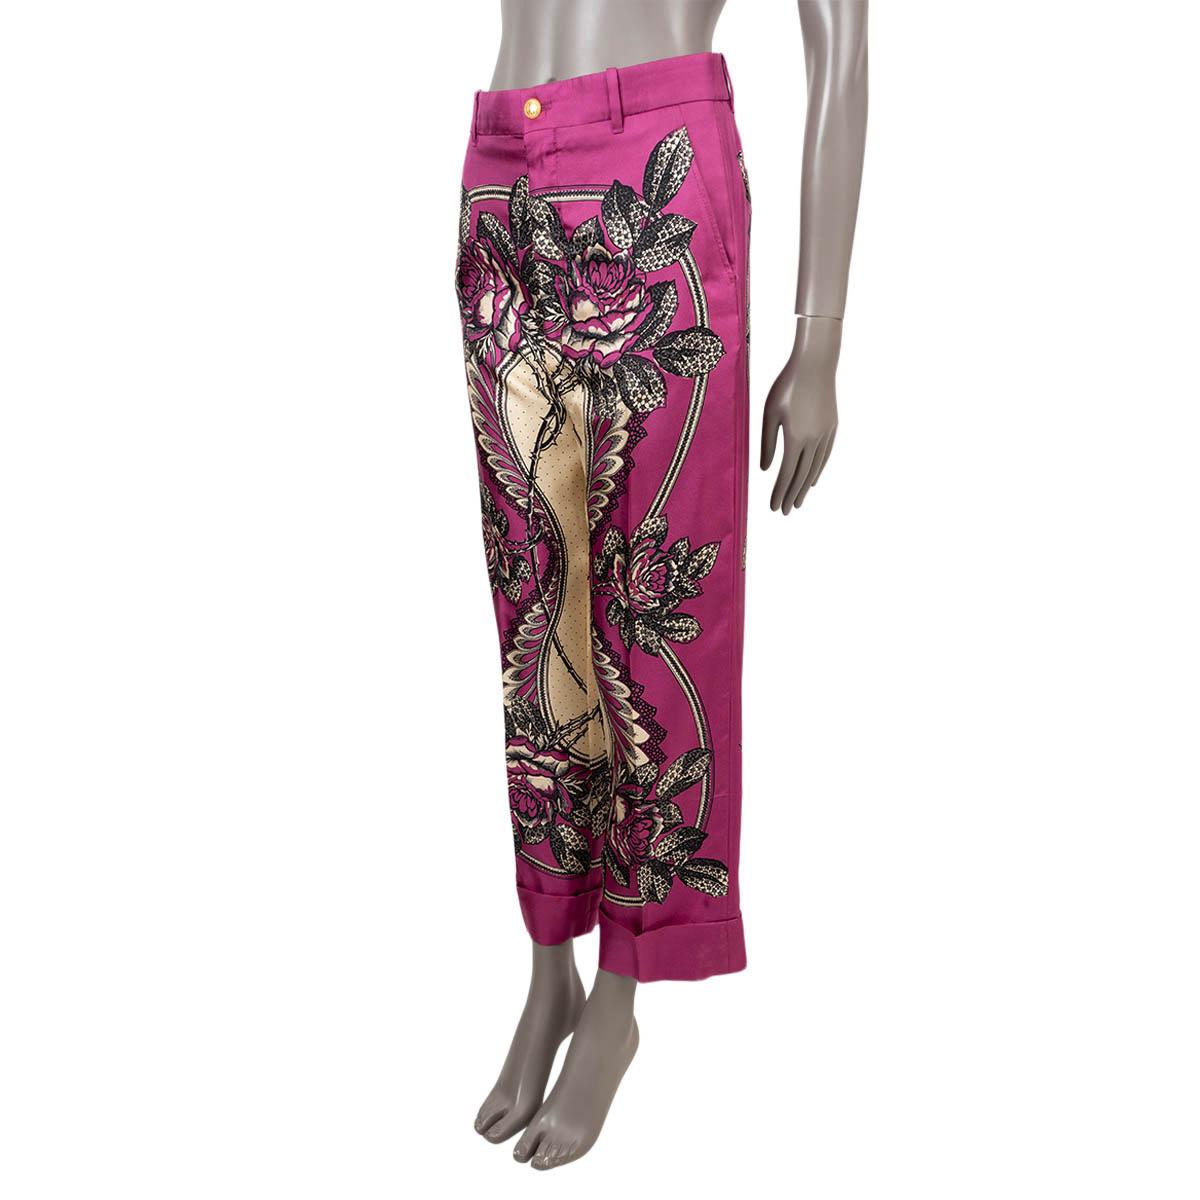 100% authentic Gucci floral wide-leg pants in fuchsia, white and black silk (100%). Feature a cropped leg, belt loops and side pockets. Close with a gold-tone button and concealed zipper. Has been worn and is in excellent condition.

2019